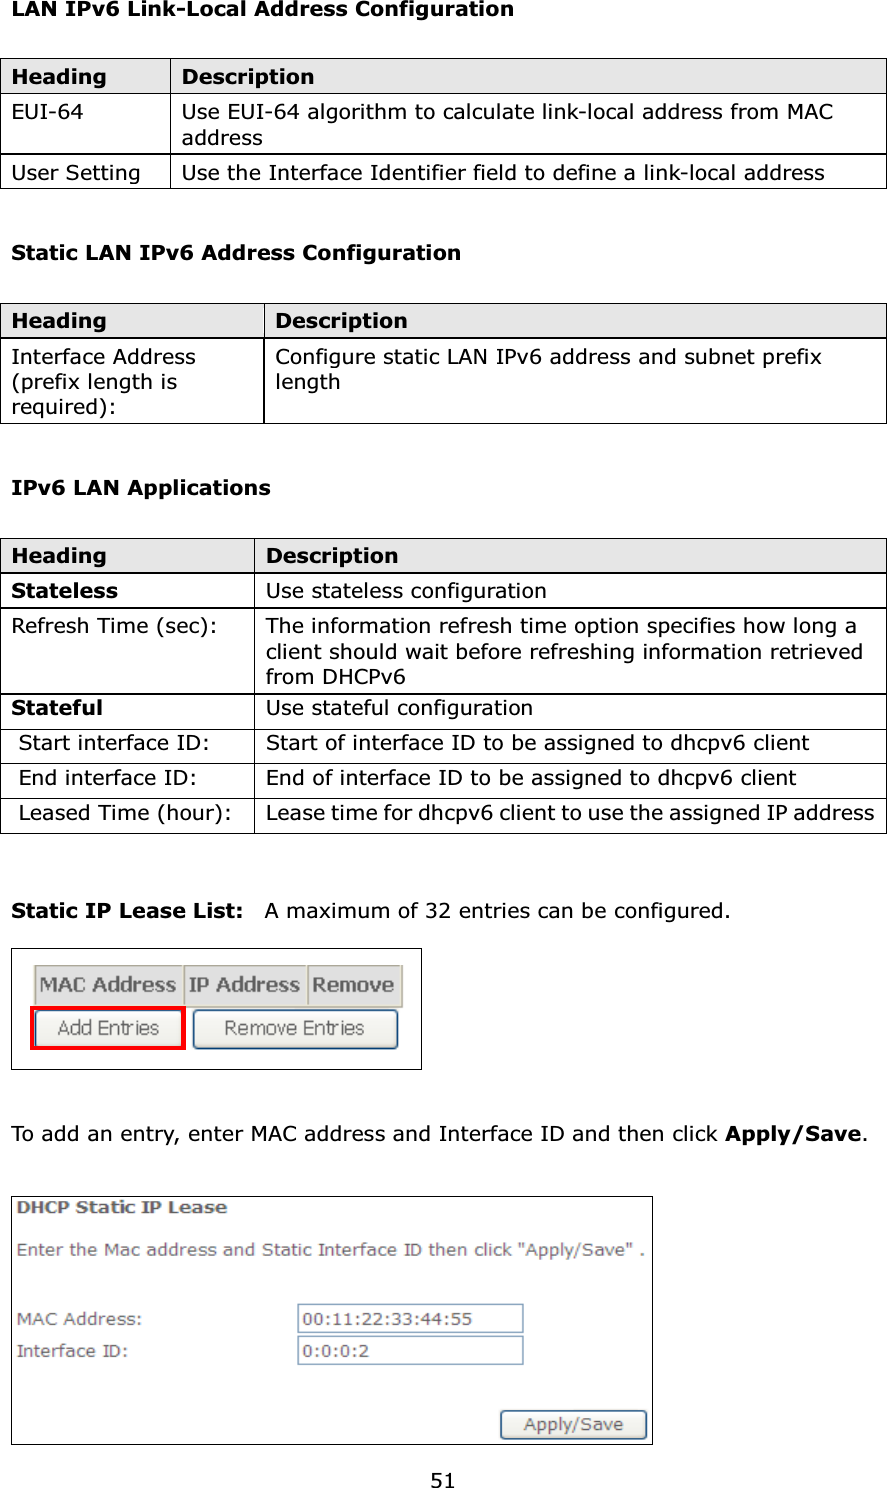  51LAN IPv6 Link-Local Address Configuration  Heading  Description EUI-64  Use EUI-64 algorithm to calculate link-local address from MAC address User Setting  Use the Interface Identifier field to define a link-local address  Static LAN IPv6 Address Configuration  Heading  Description Interface Address   (prefix length is required): Configure static LAN IPv6 address and subnet prefix length  IPv6 LAN Applications  Heading  Description Stateless  Use stateless configurationRefresh Time (sec):  The information refresh time option specifies how long a client should wait before refreshing information retrieved from DHCPv6Stateful  Use stateful configuration Start interface ID:  Start of interface ID to be assigned to dhcpv6 client End interface ID:  End of interface ID to be assigned to dhcpv6 client Leased Time (hour):  Lease time for dhcpv6 client to use the assigned IP address  Static IP Lease List:  A maximum of 32 entries can be configured.    To add an entry, enter MAC address and Interface ID and then click Apply/Save.   